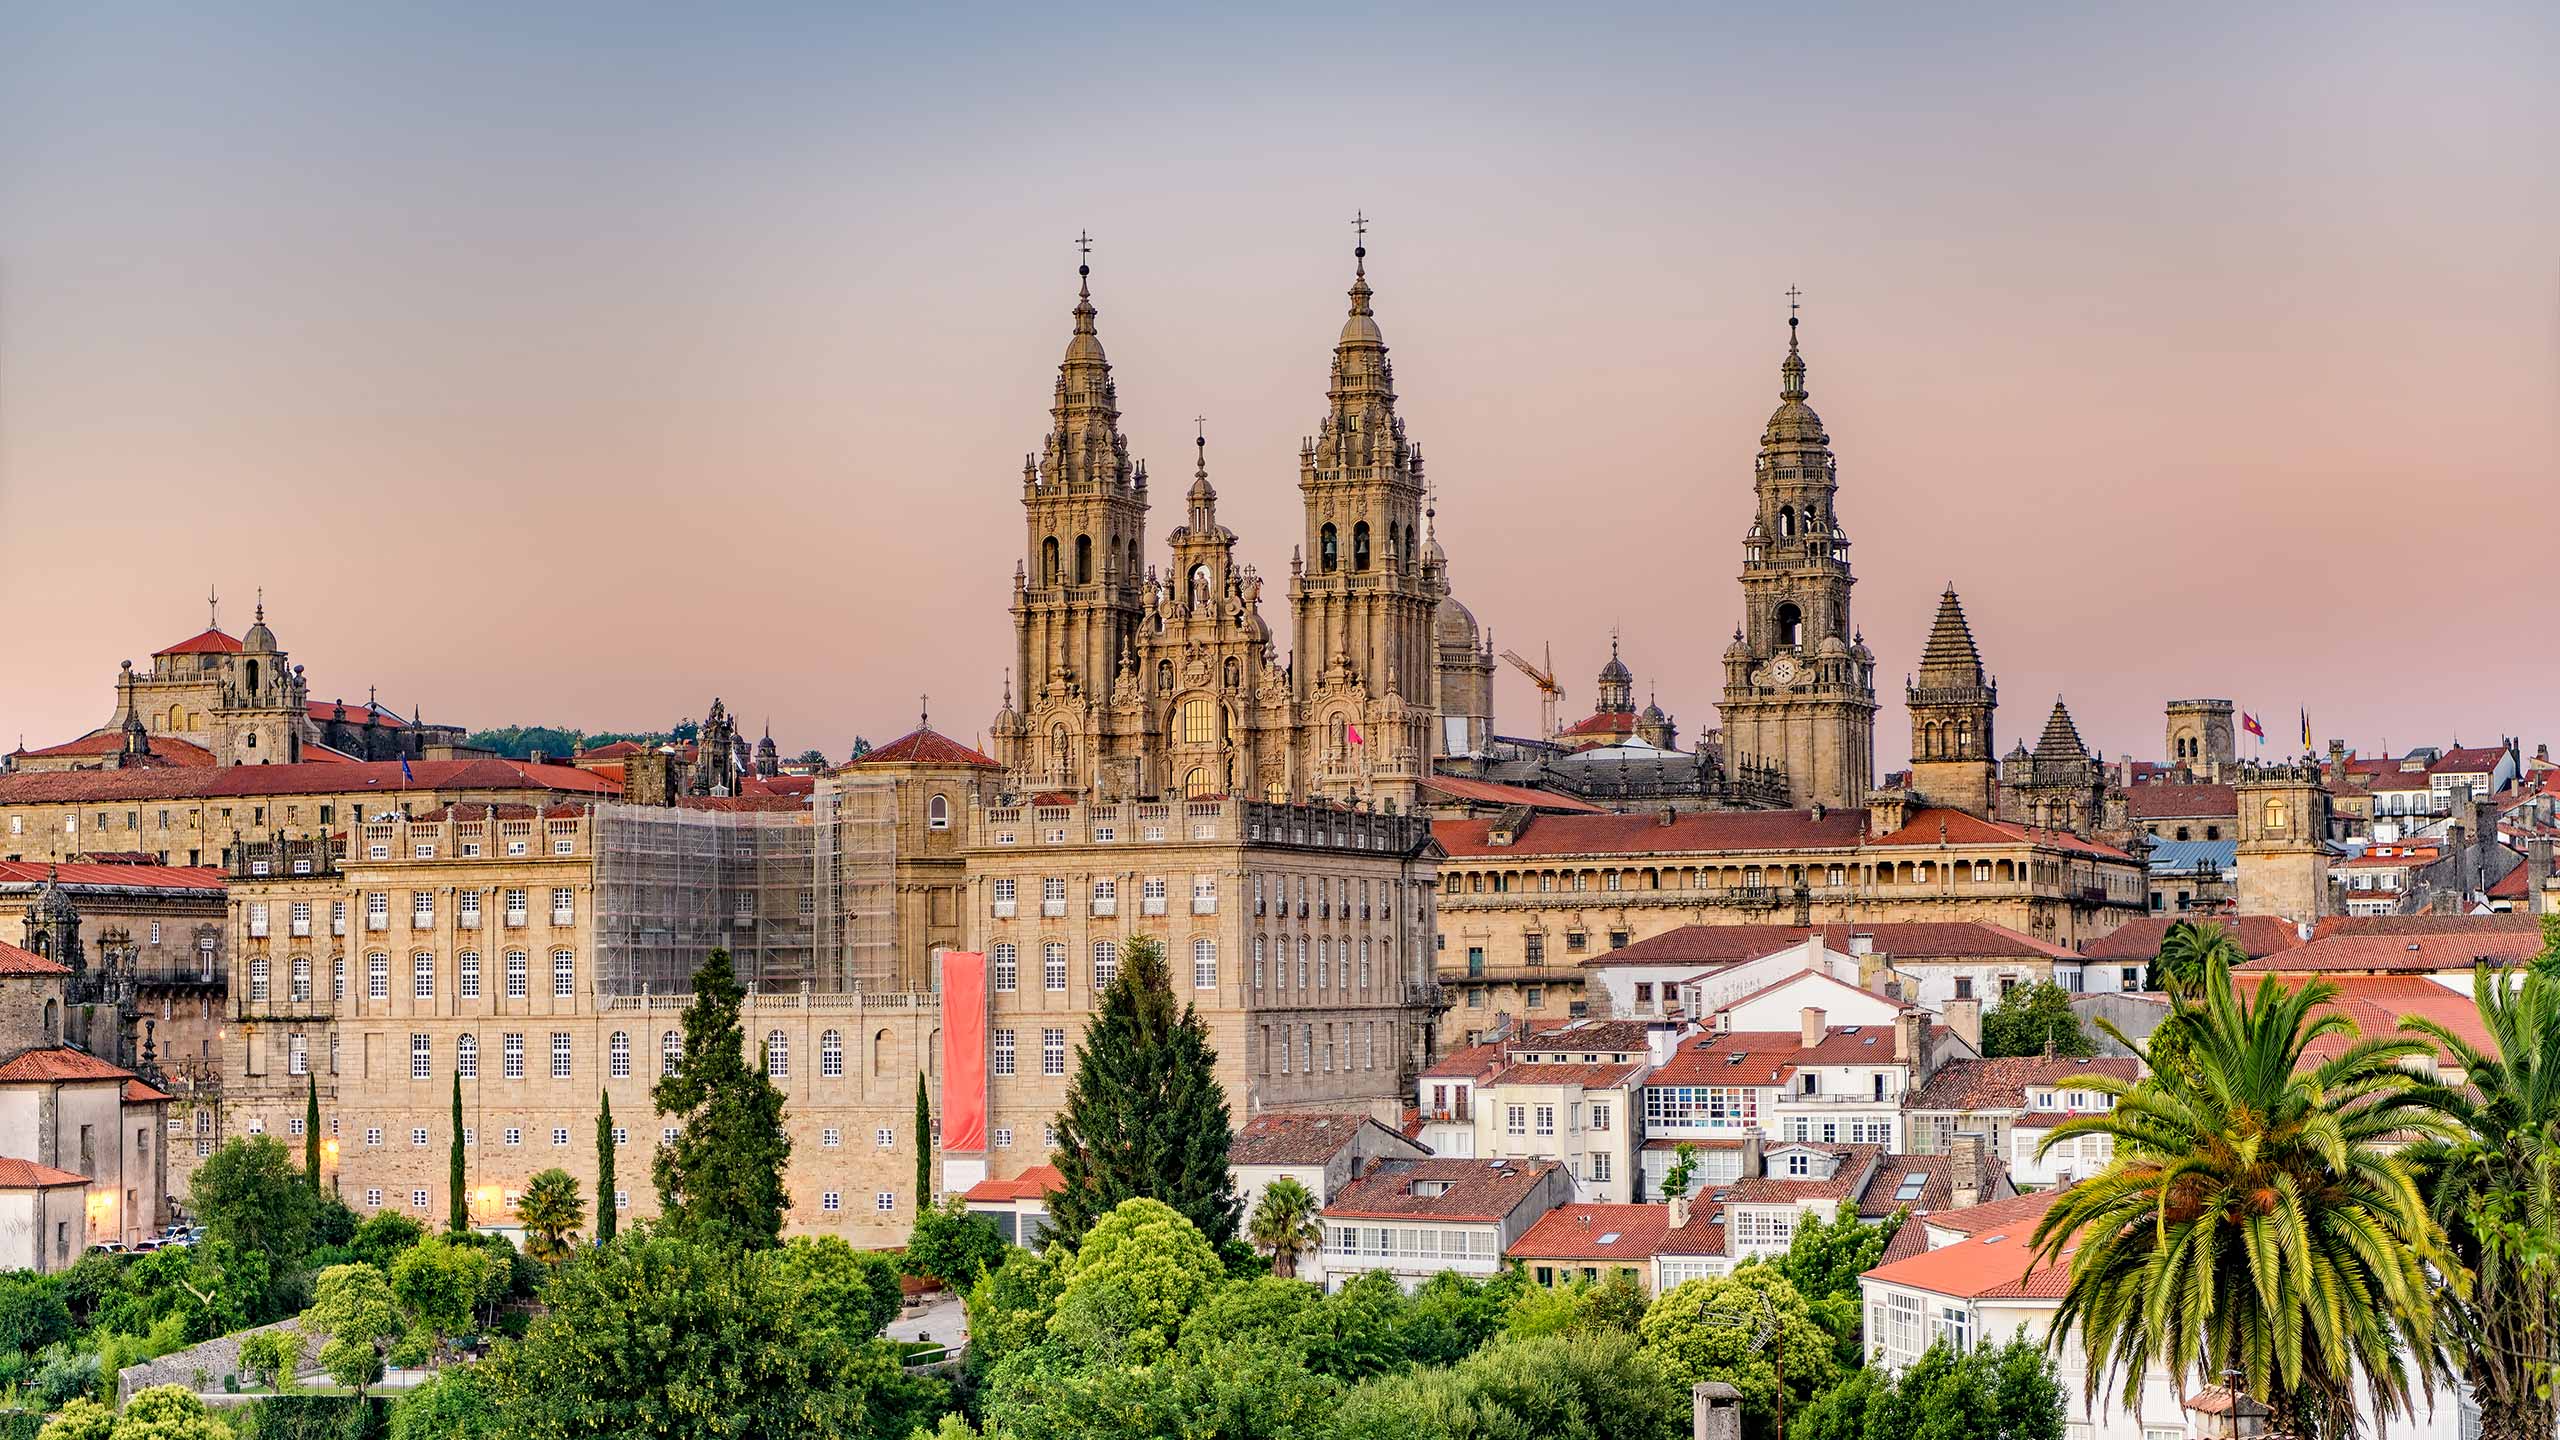 Hazy sunset on Santiago de Compostela cathedral and city view.